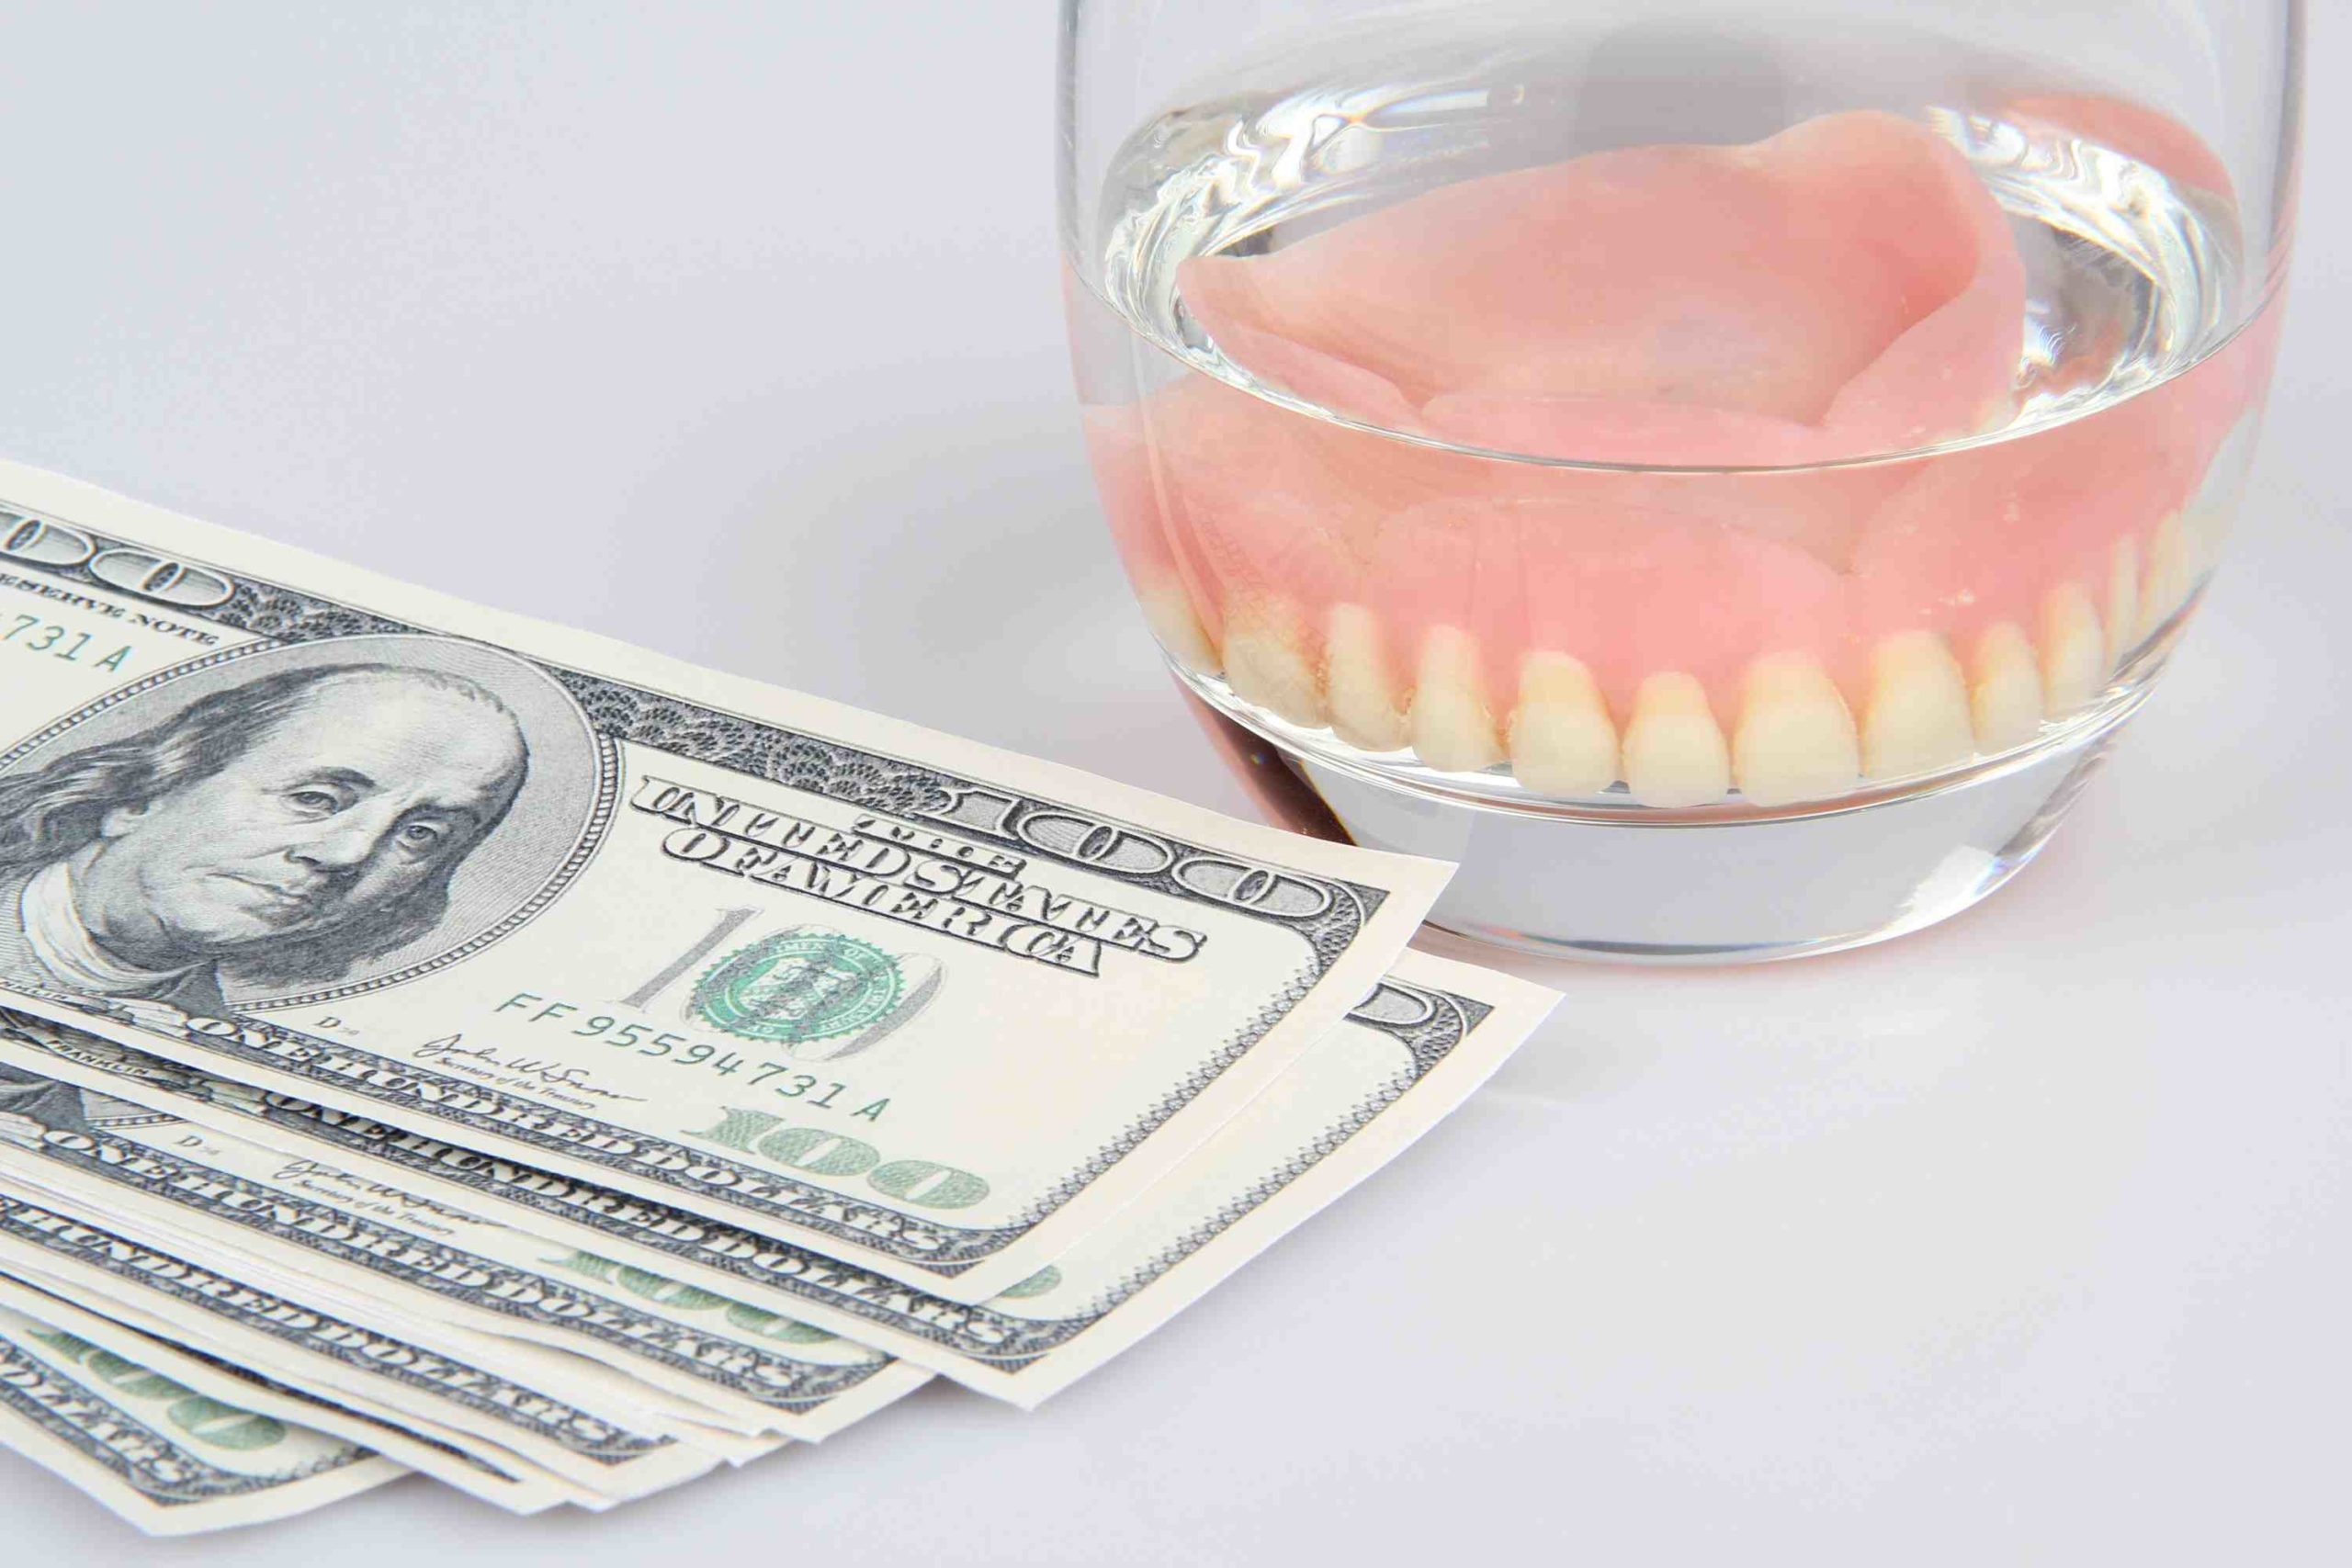 Does medicaid cover dental implants in ny? Dental News Network